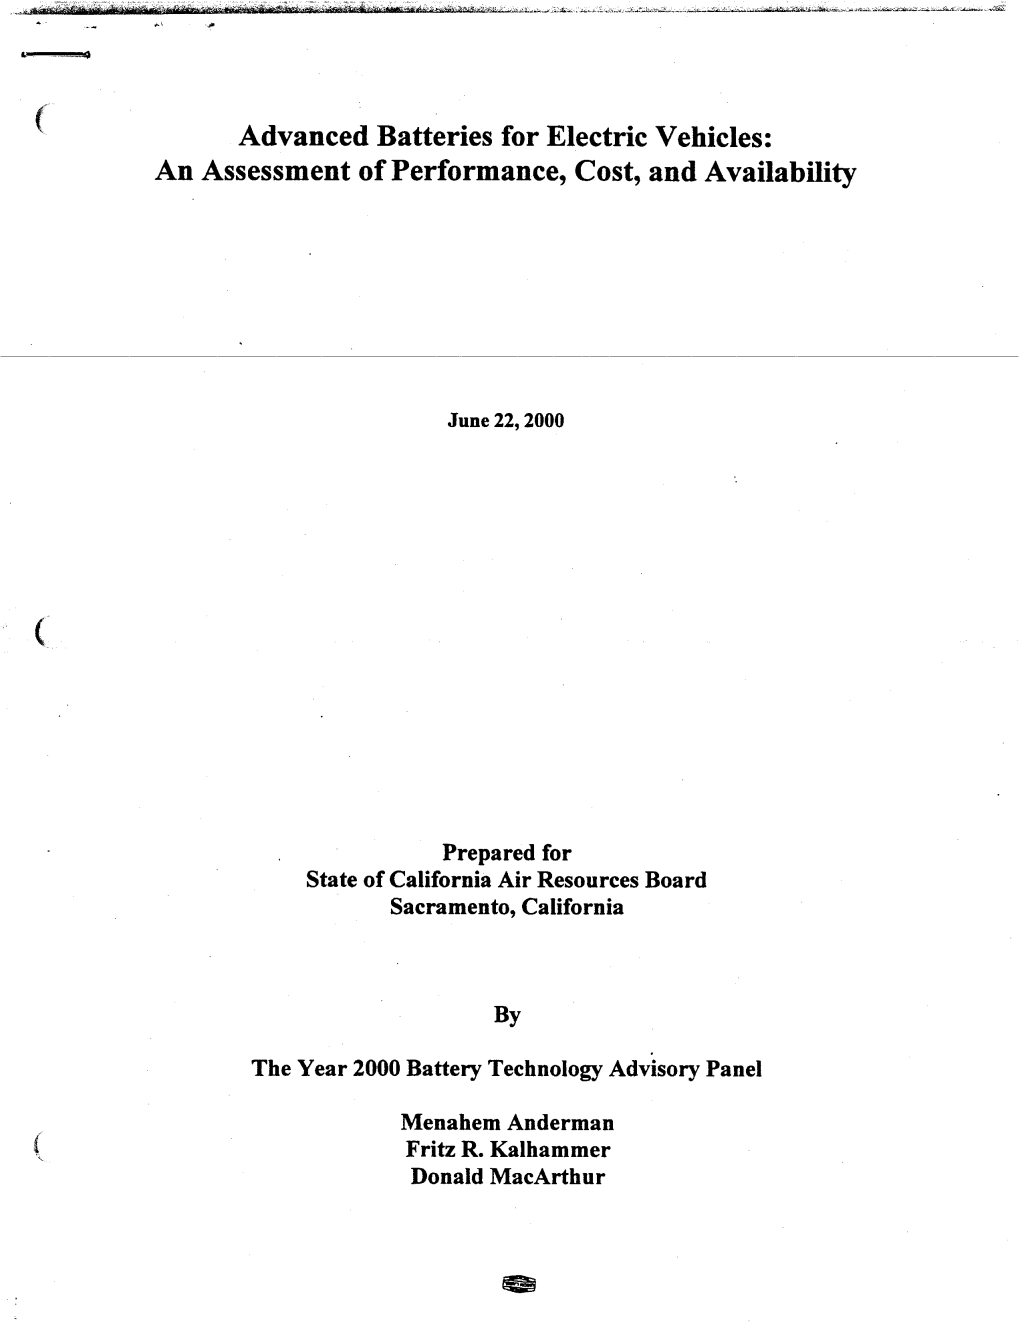 Advanced Batteries for Electric Vehicles: an Assessment Ofperformance, Cost, and Availability